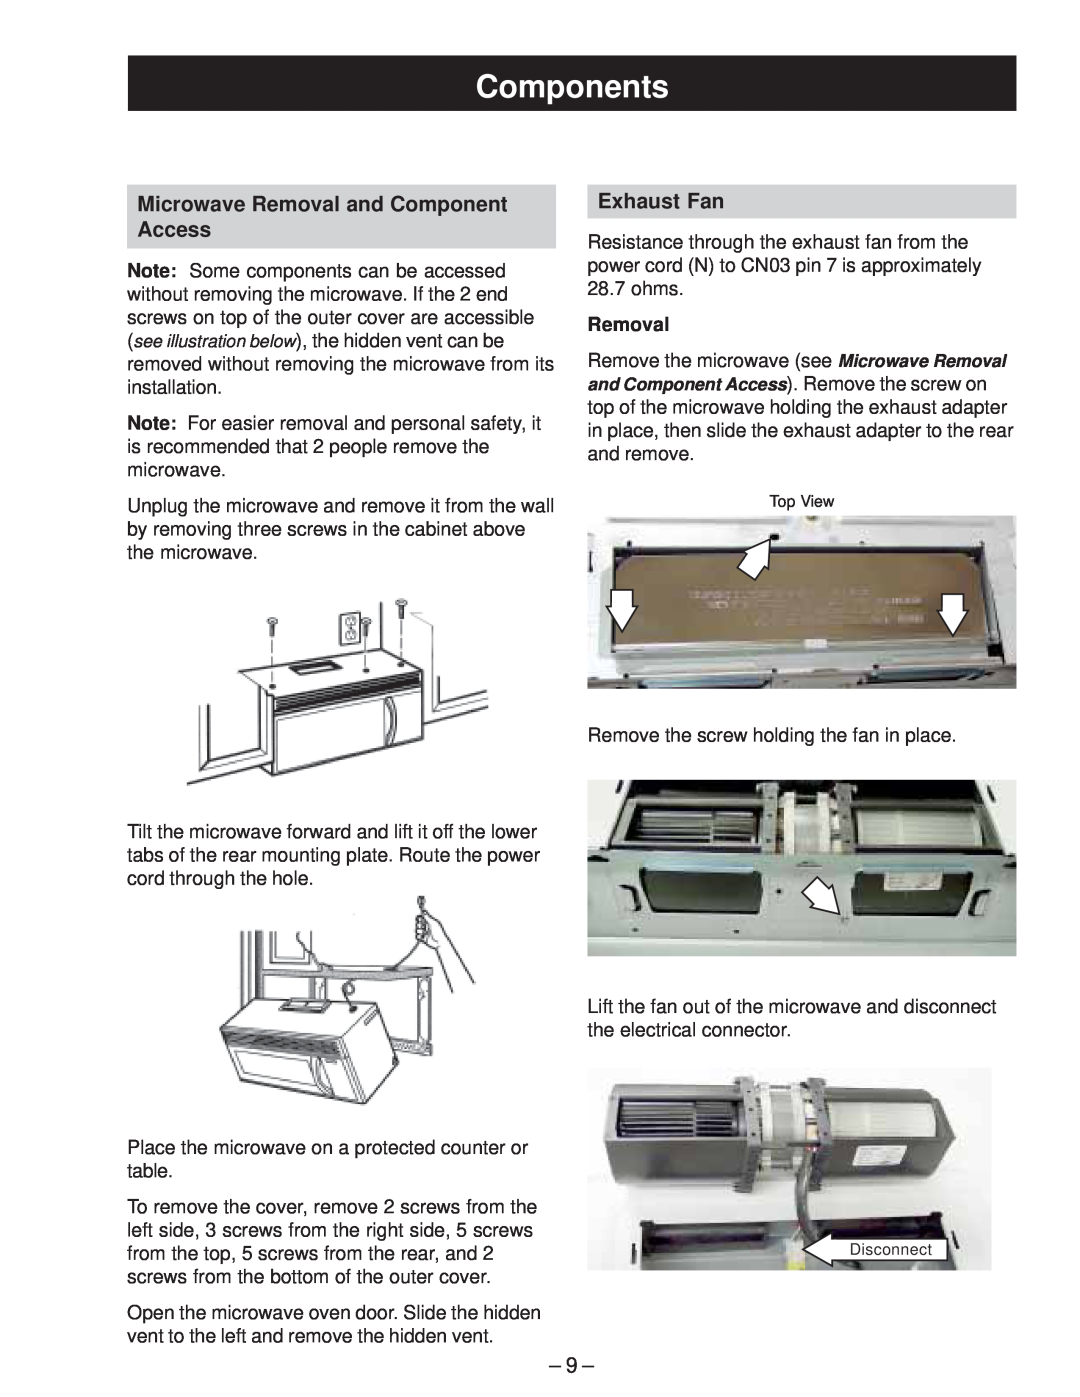 GE JVM2070_H manual Components, Microwave Removal and Component Access, Exhaust Fan 